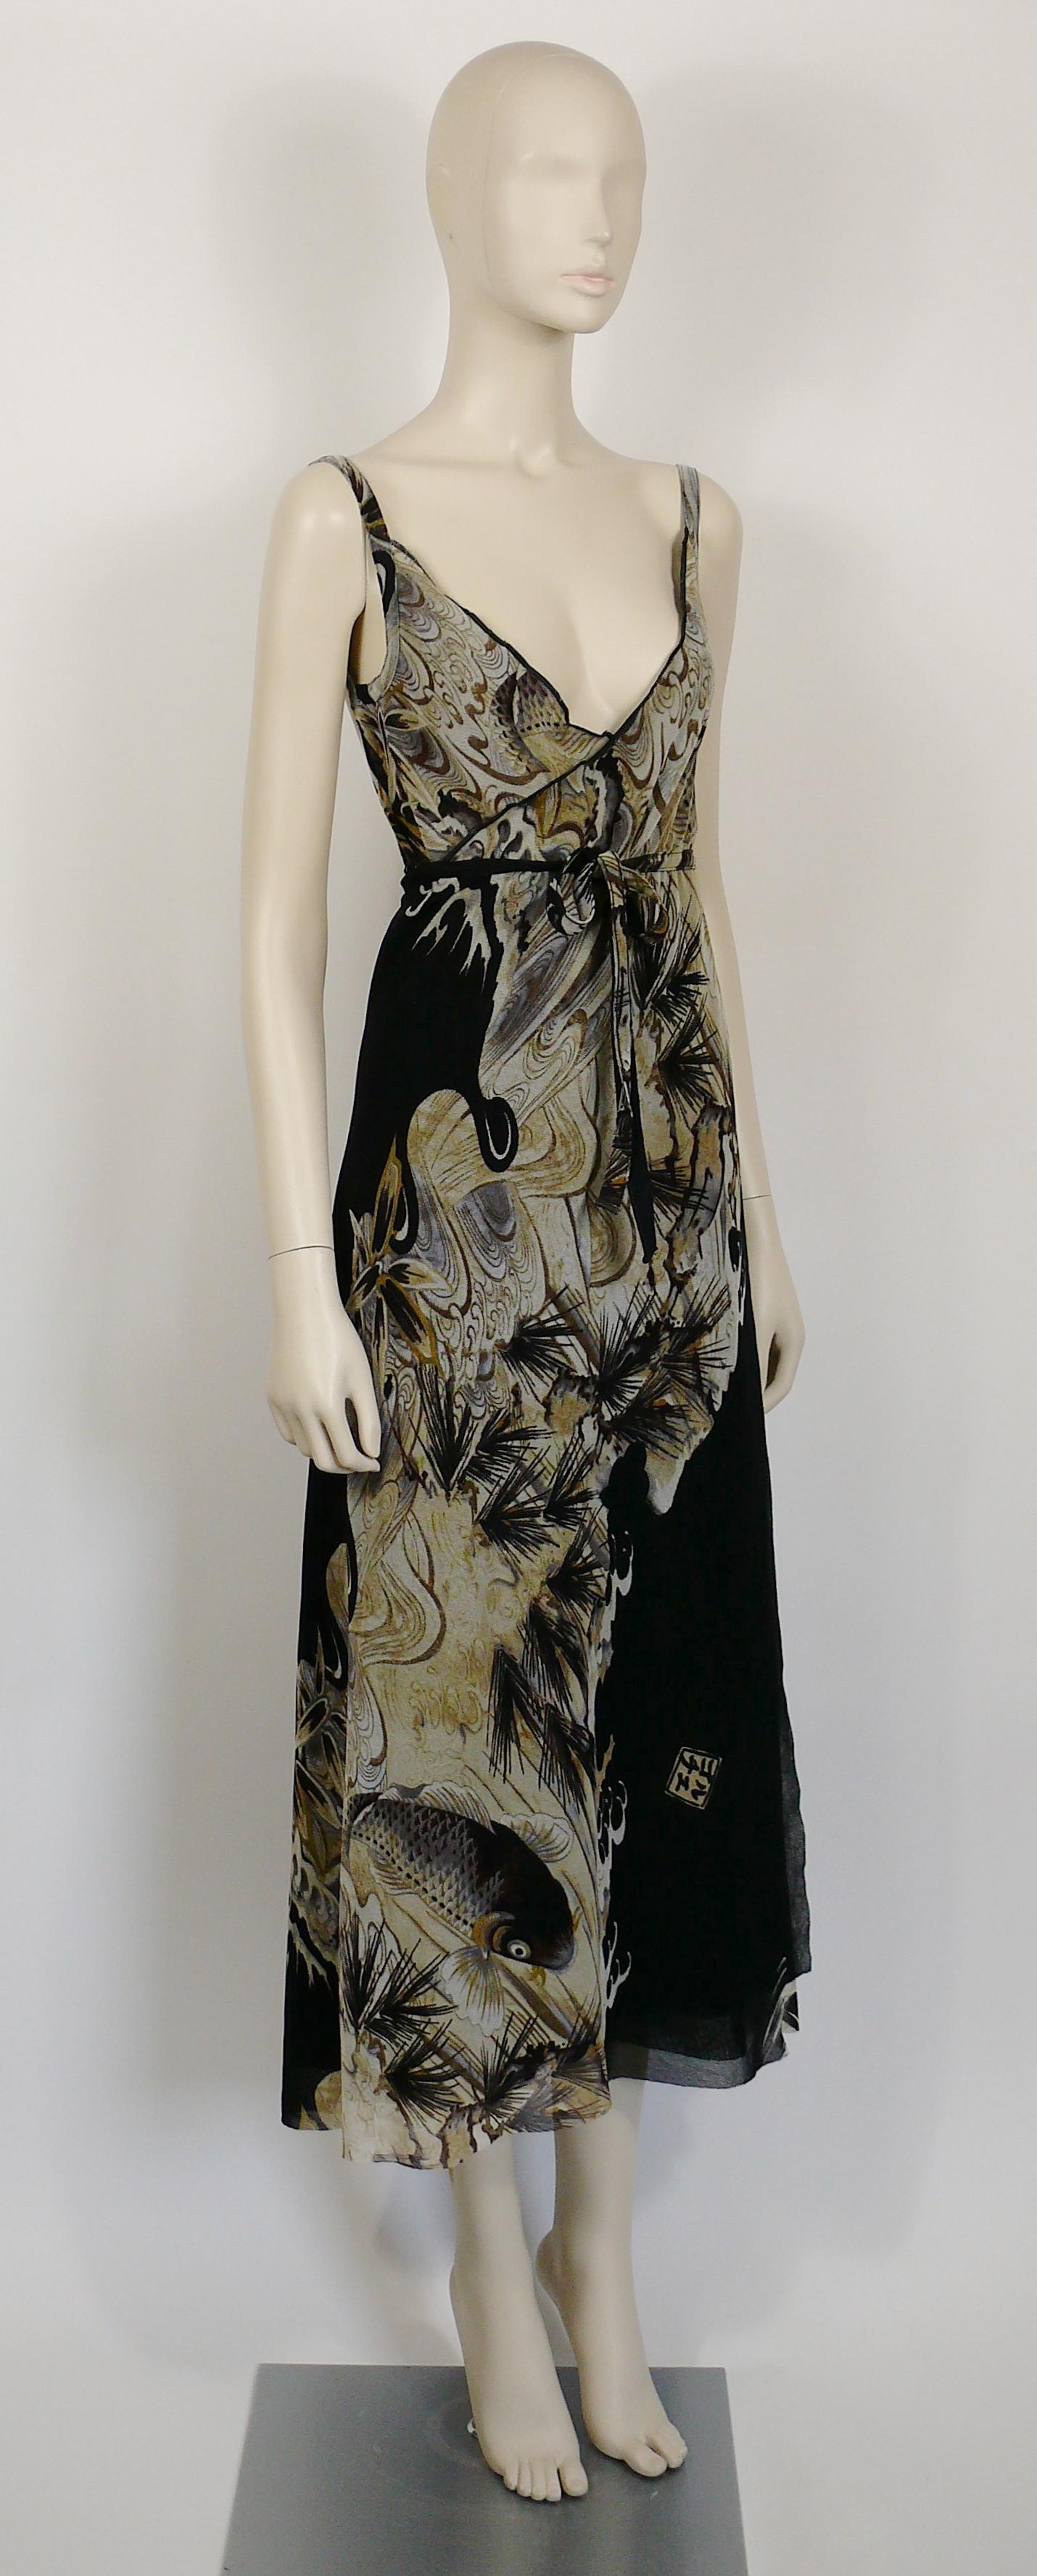 JEAN PAUL GAULTIER vintage koi fish tattoo sheer mesh wrap dress.

Label reads JEAN PAUL GAULTIER SOLEIL.
Made in Italy.

Size label reads : M.

Composition tag reads : 100% Nylon.

NOTES
- This is a preloved vintage item, therefore it might have